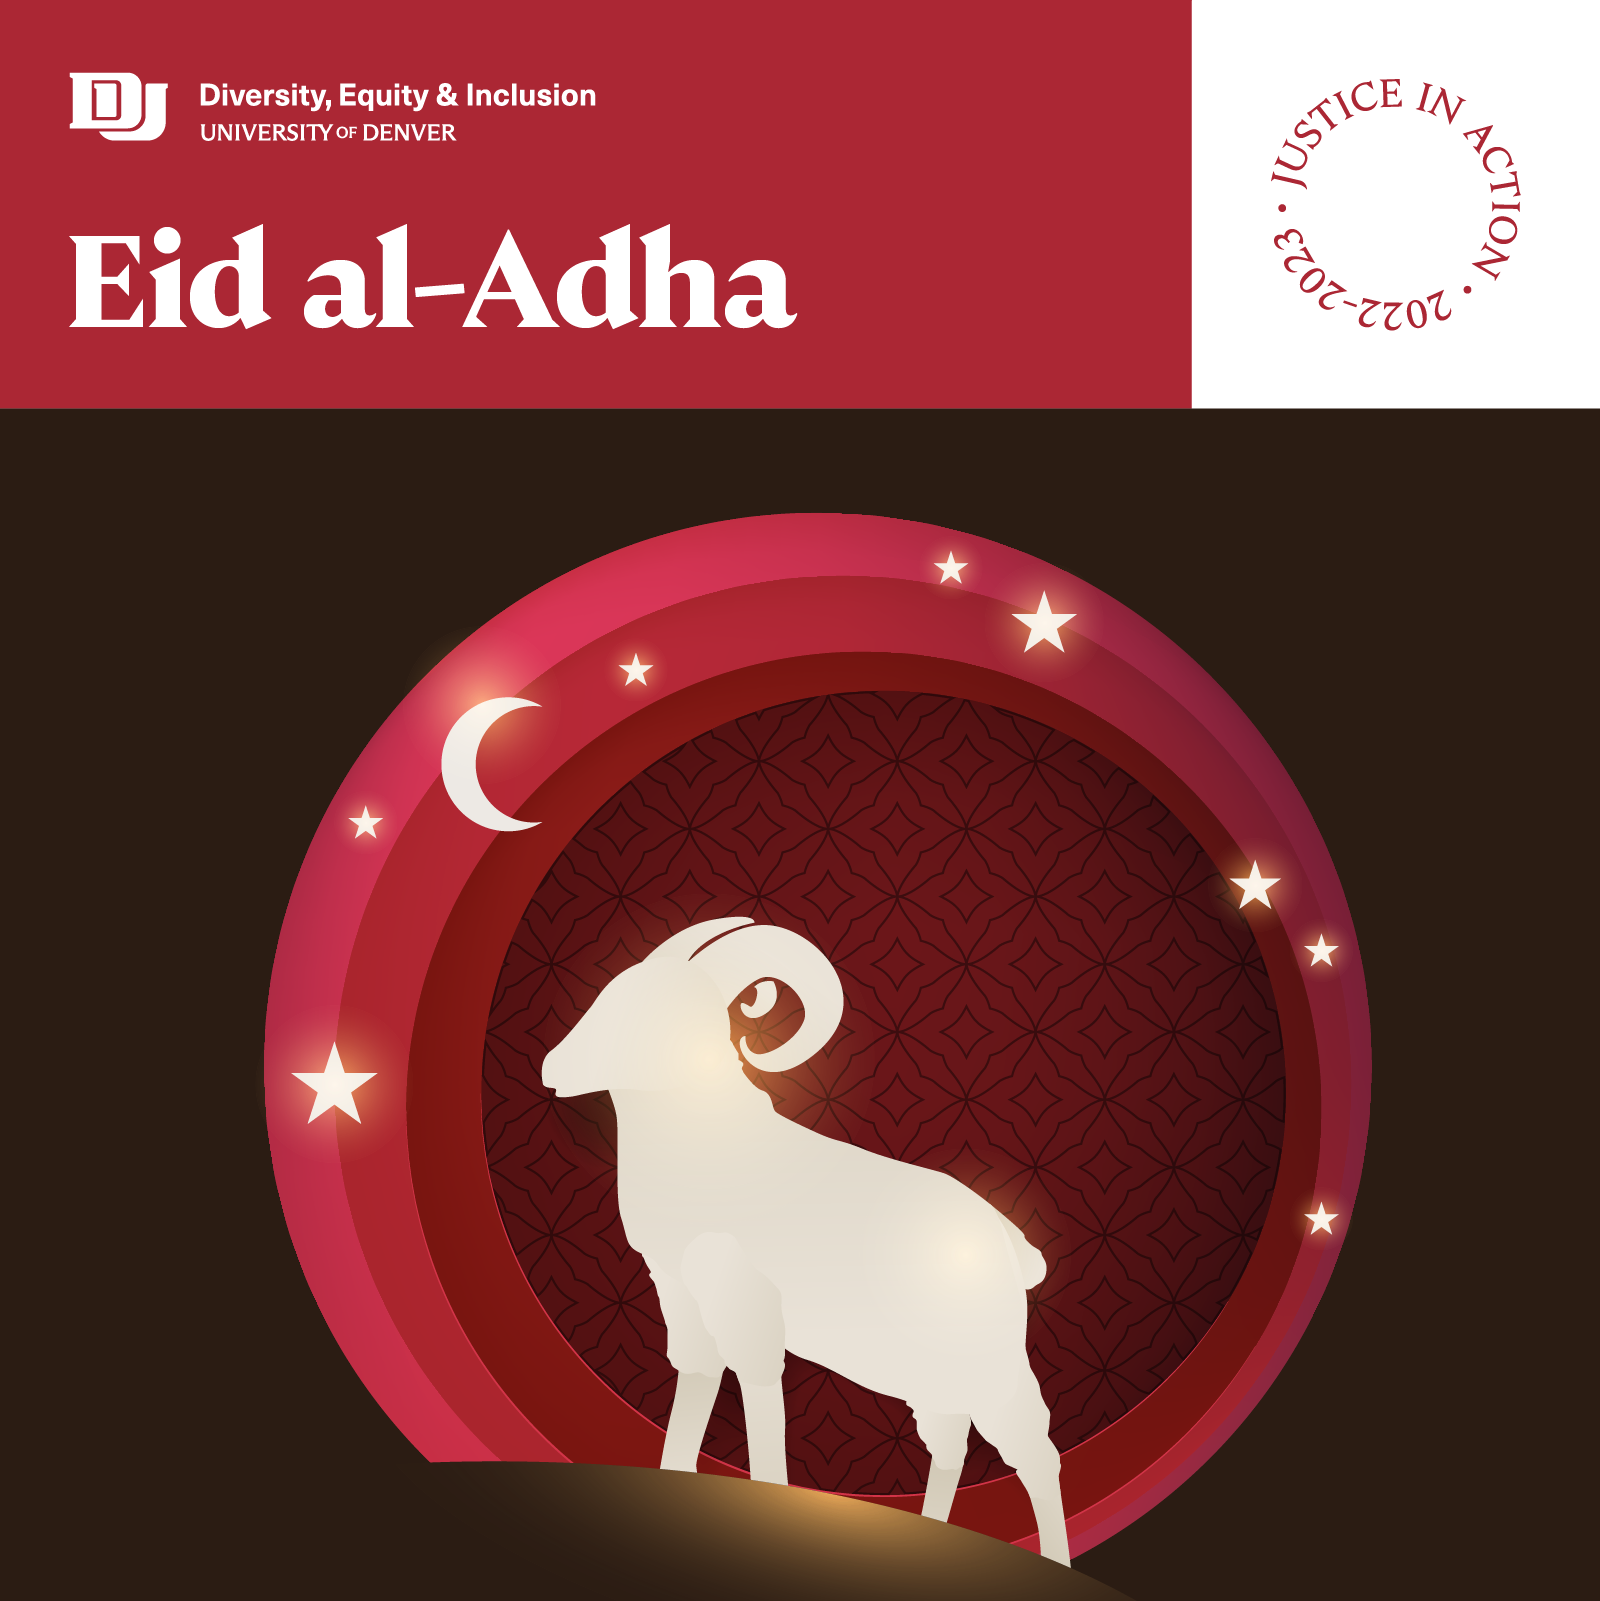 Eid al-Adha Graphic; a white lamb within in a red circle